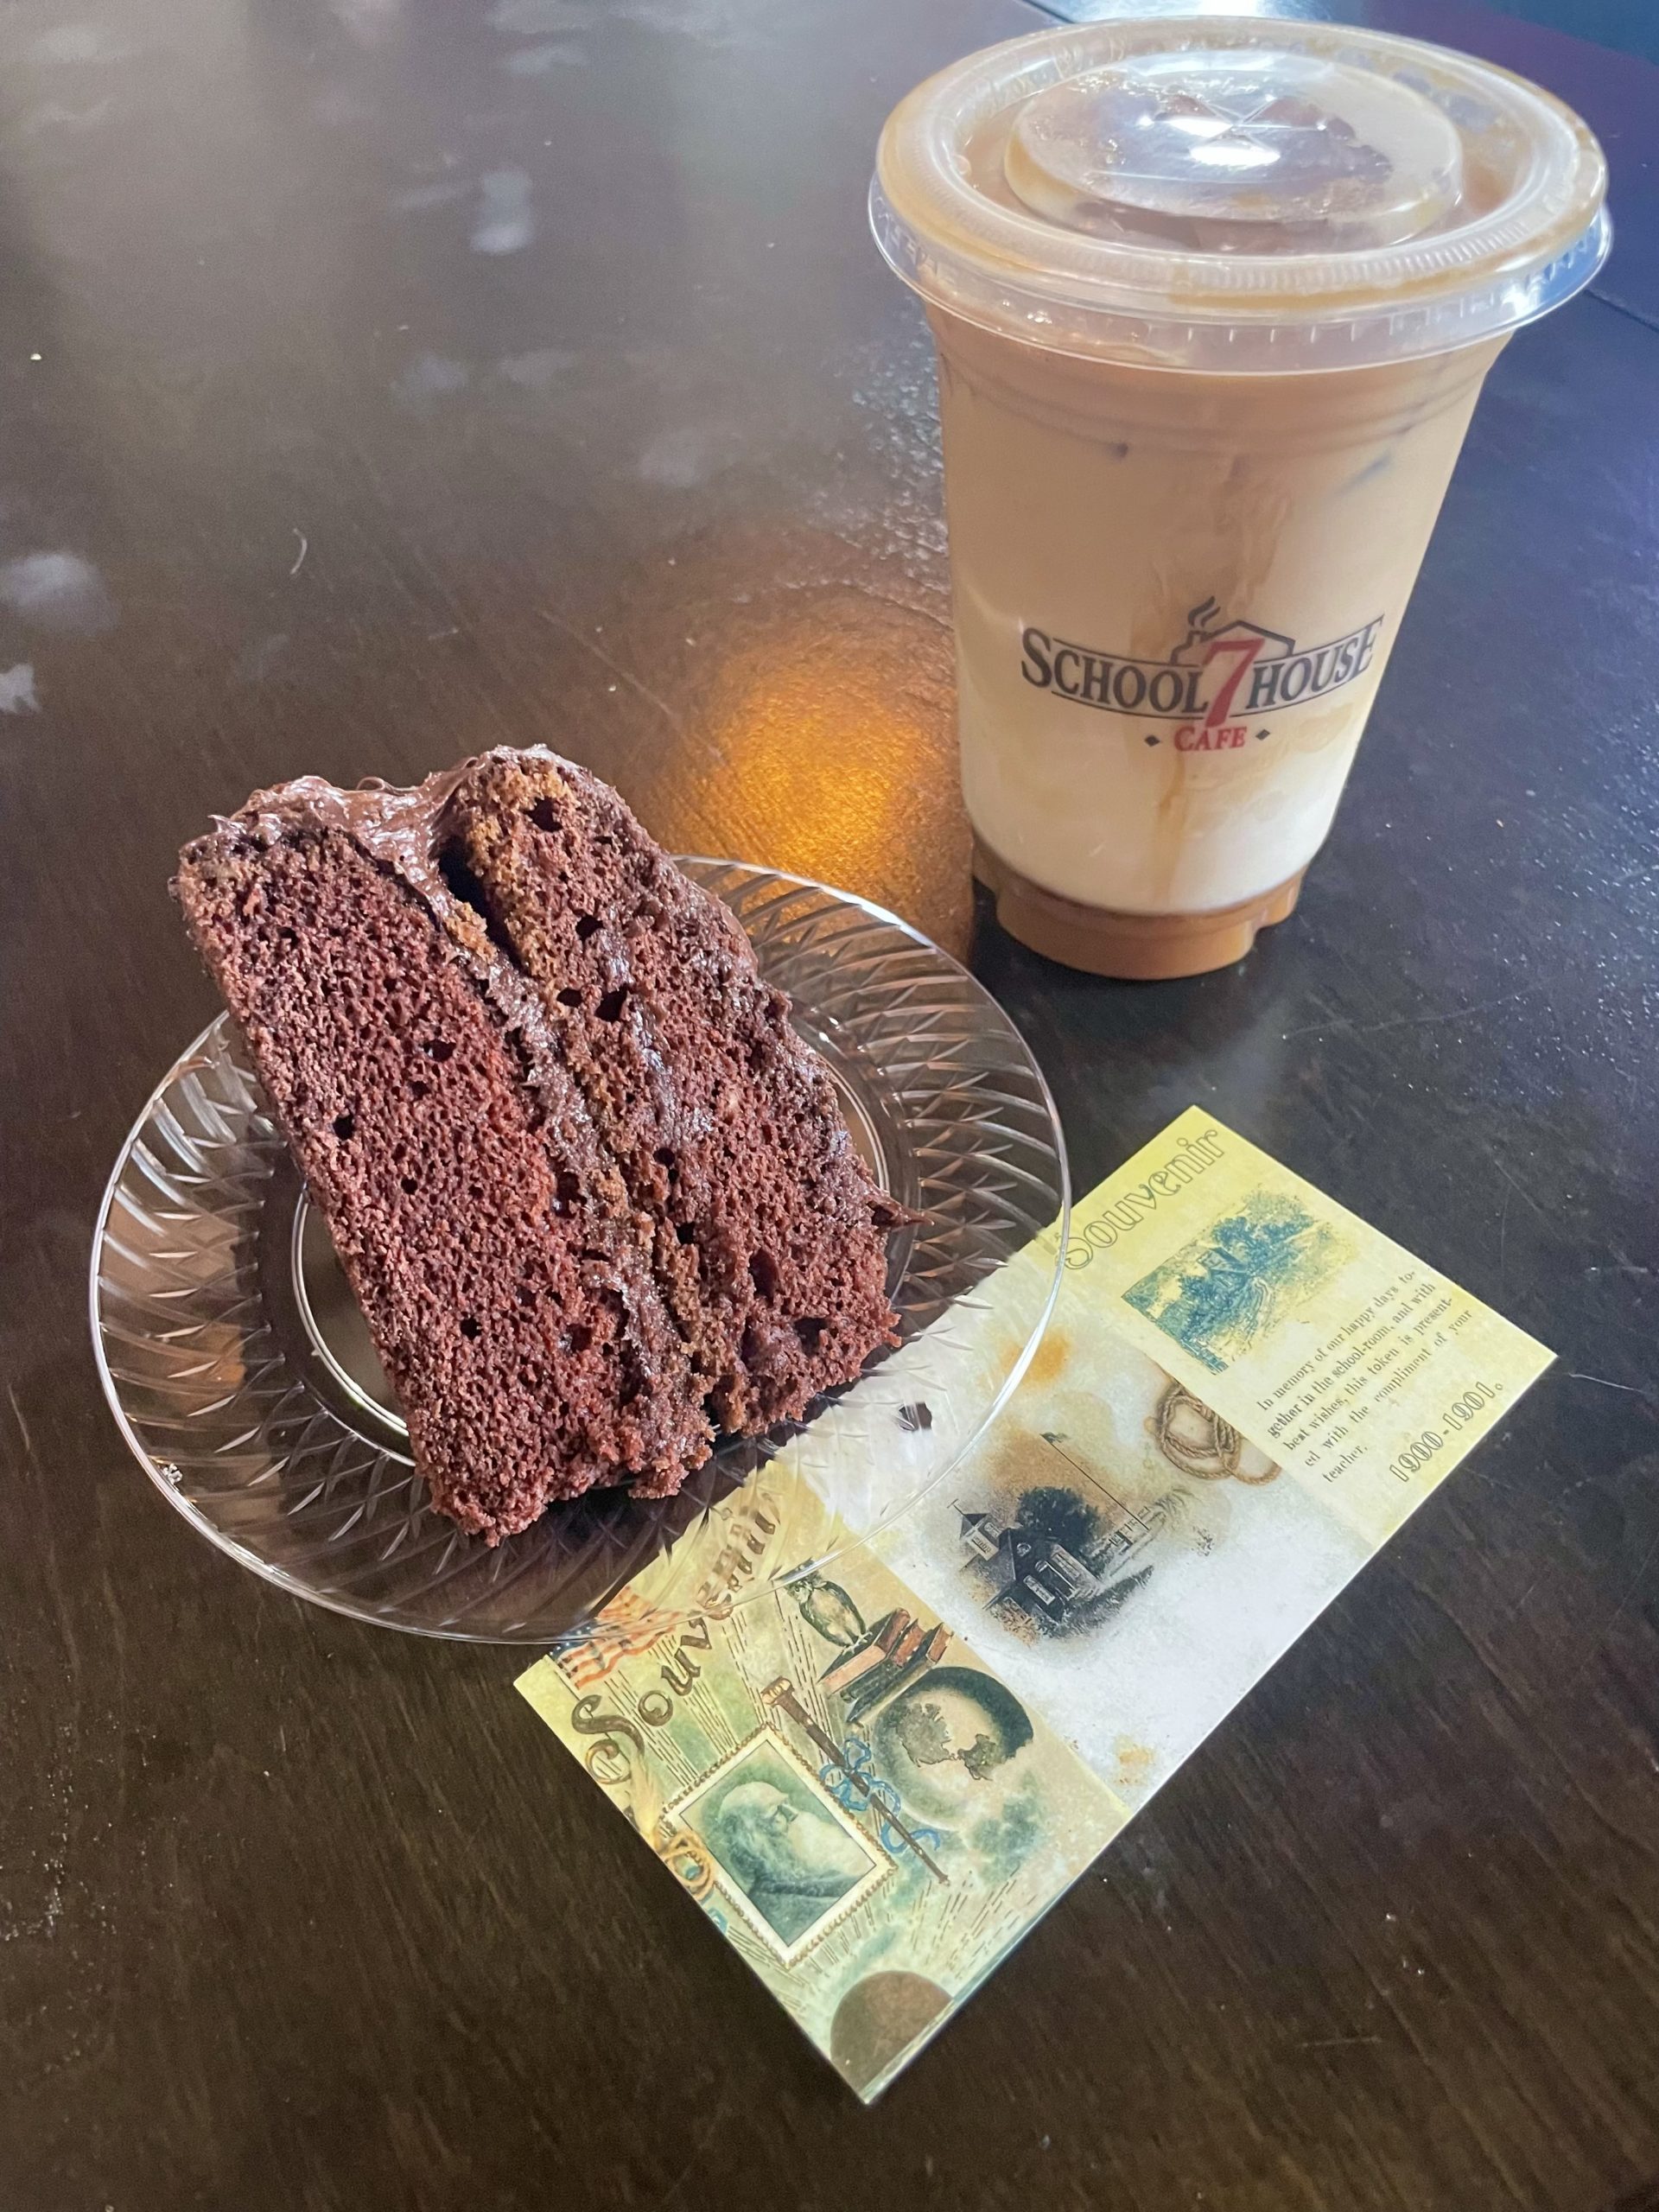 cake, drink, and bookmark on table